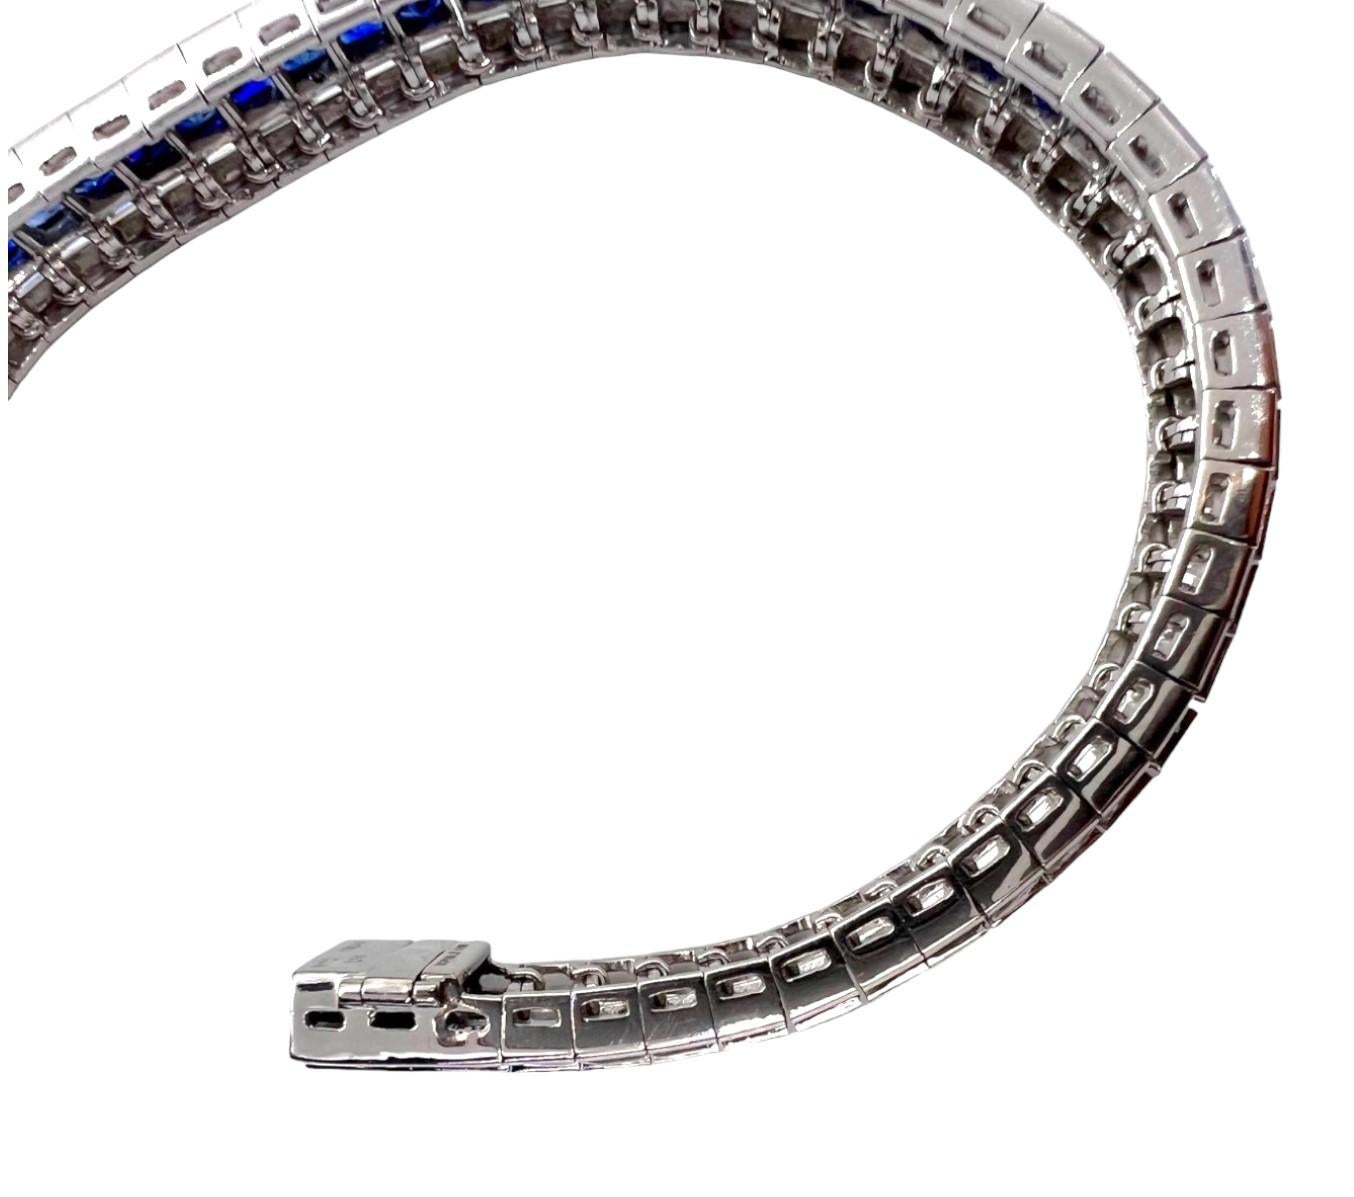 Sophia D bracelets with 12.83 carats of blue sapphires and 7.36 carats of diamonds in platinum setting.

The bracelet length is approximately 7 inches and 0.5 inches wide. 

Sophia D by Joseph Dardashti LTD has been known worldwide for 35 years and